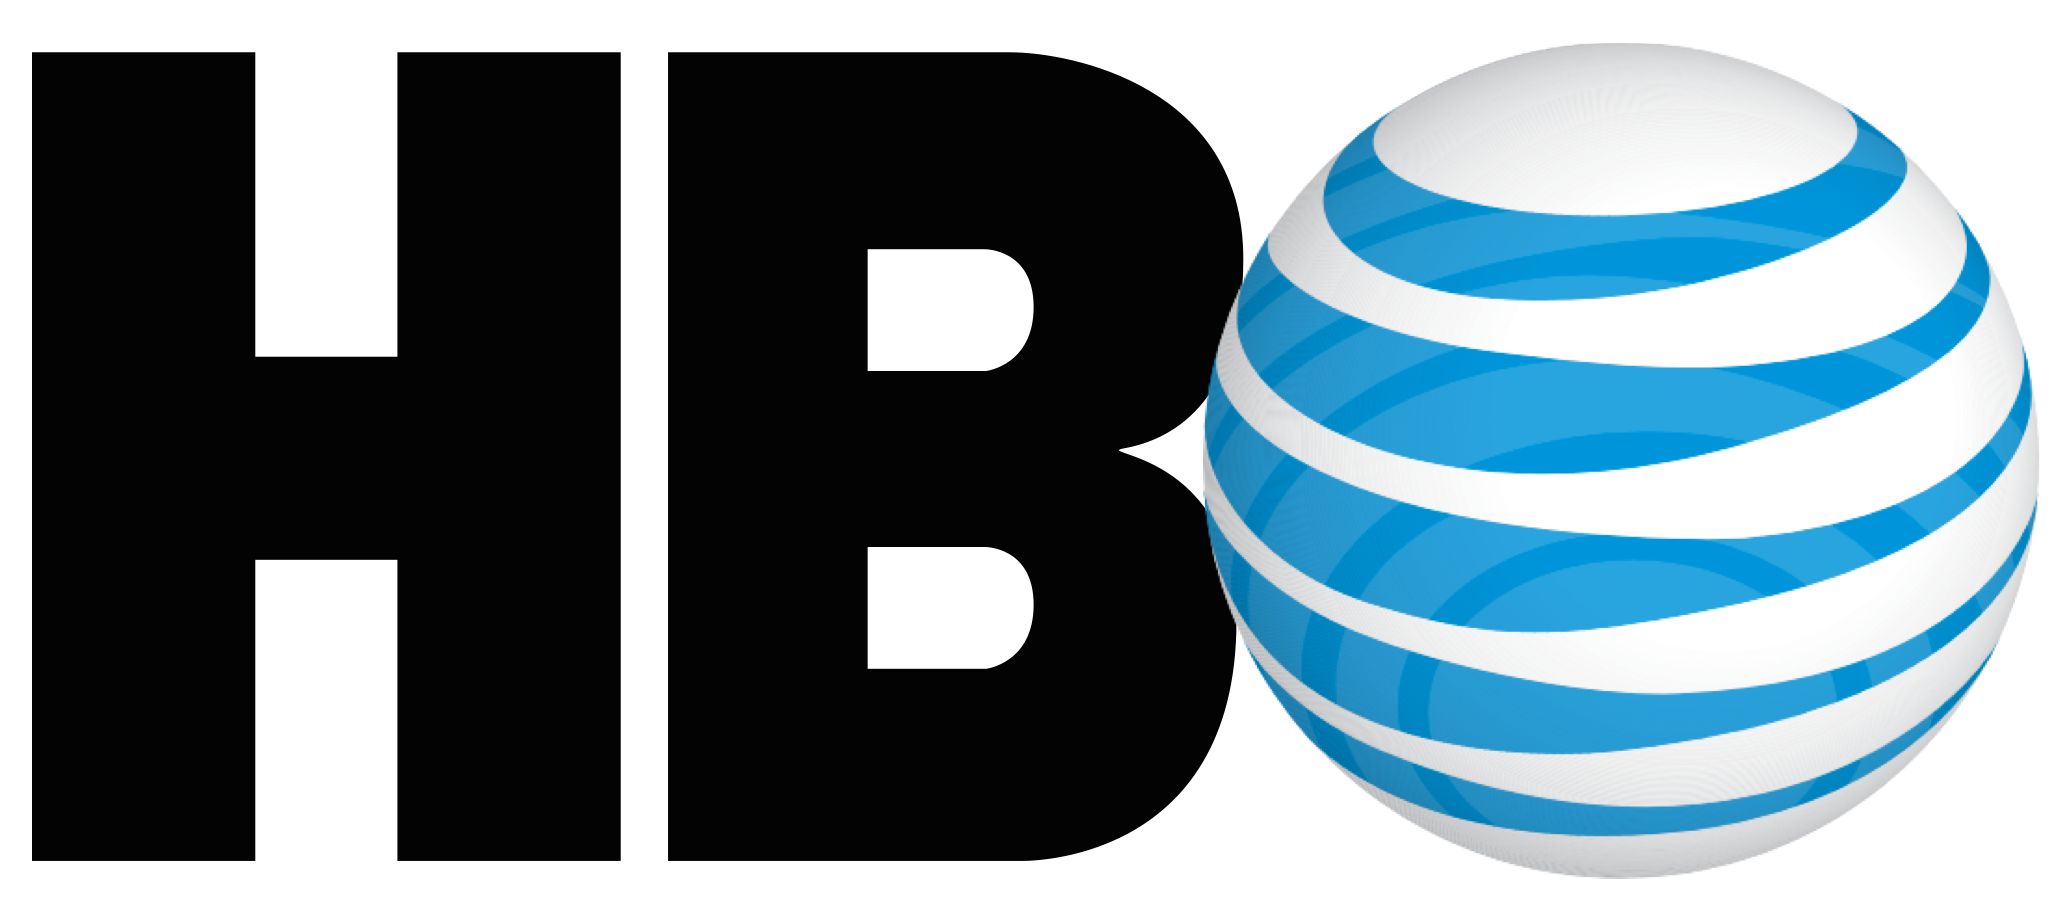 AT&T Confirms $85 Billion Acquisition Of Time Warner Inc.